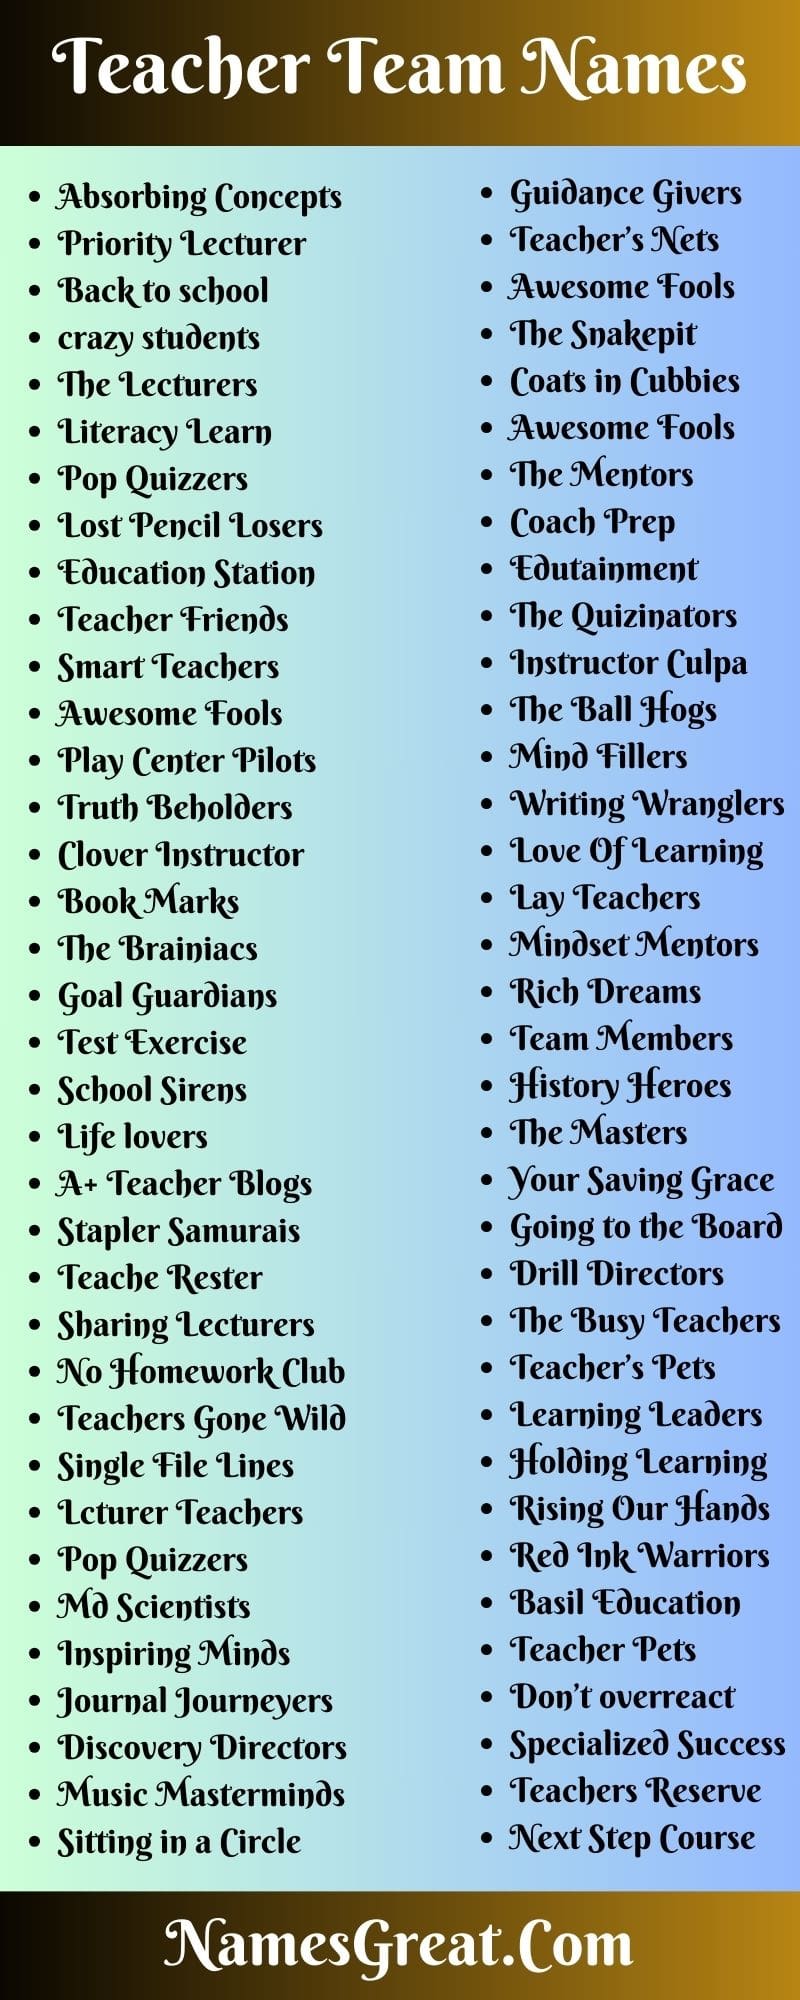 Synonyms of GREAT - The crazy teacher's blog The crazy teacher's blog